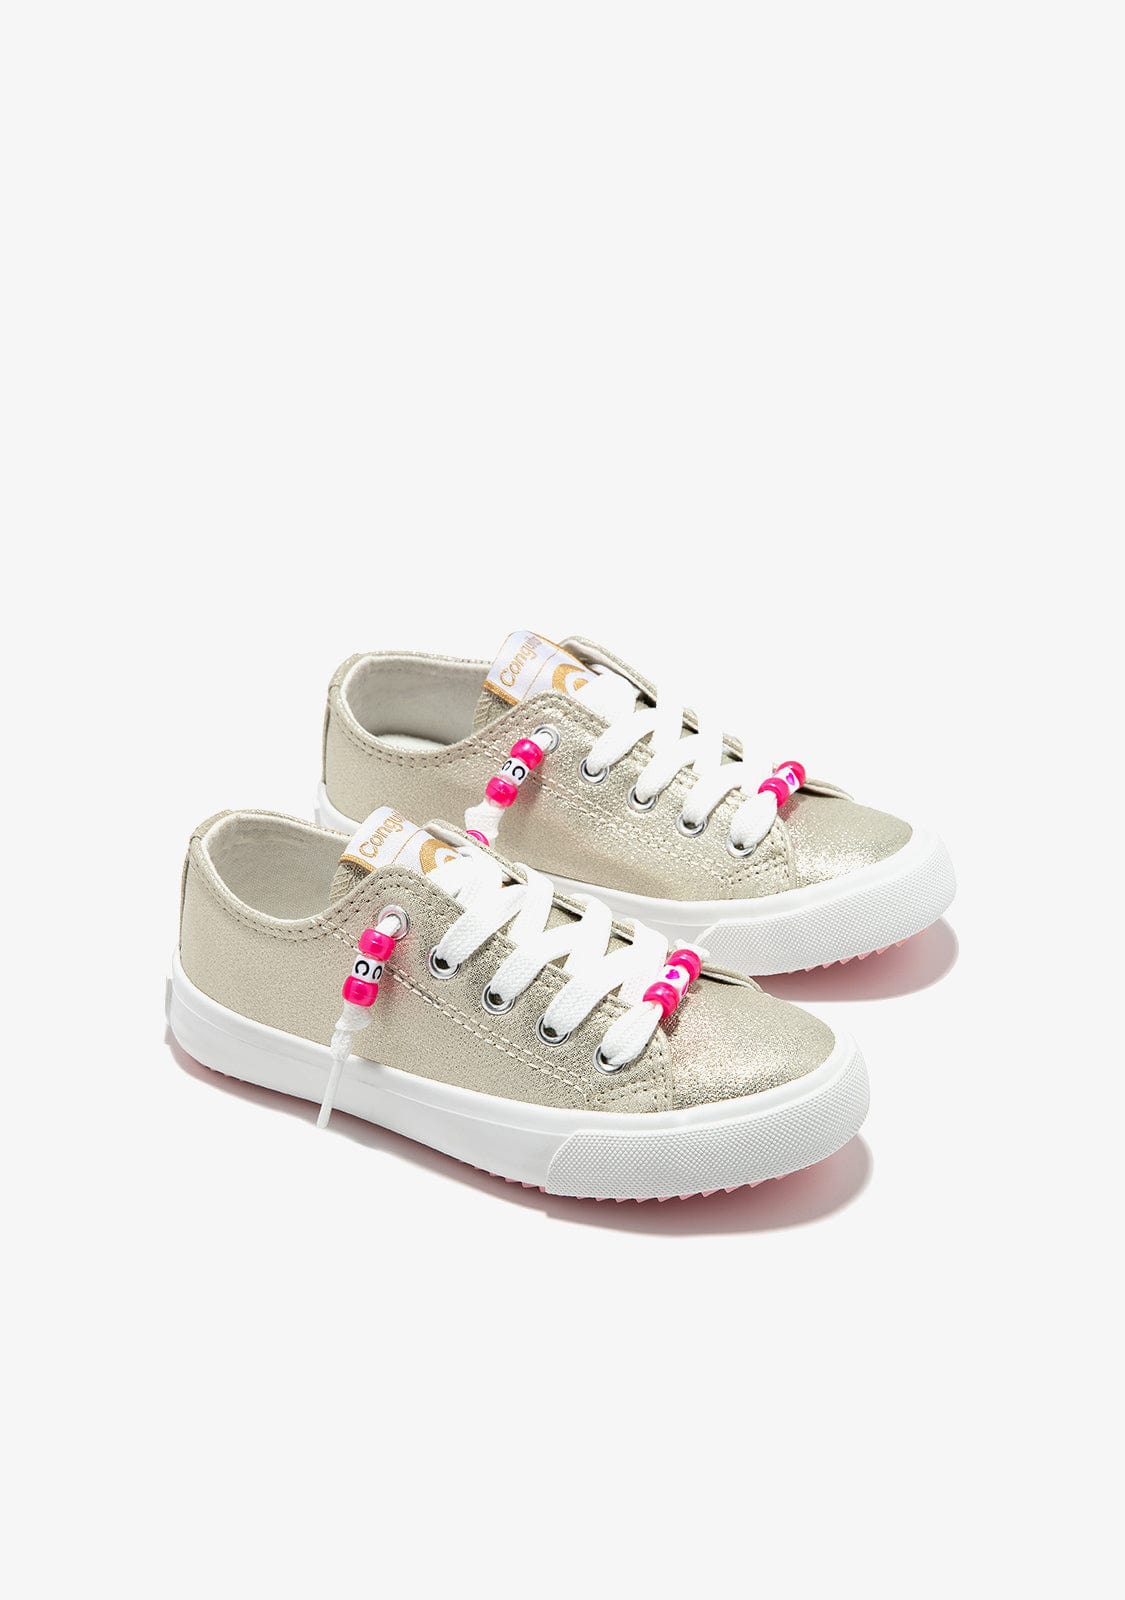 Conguitos BASKET Gold Metallized Sneakers